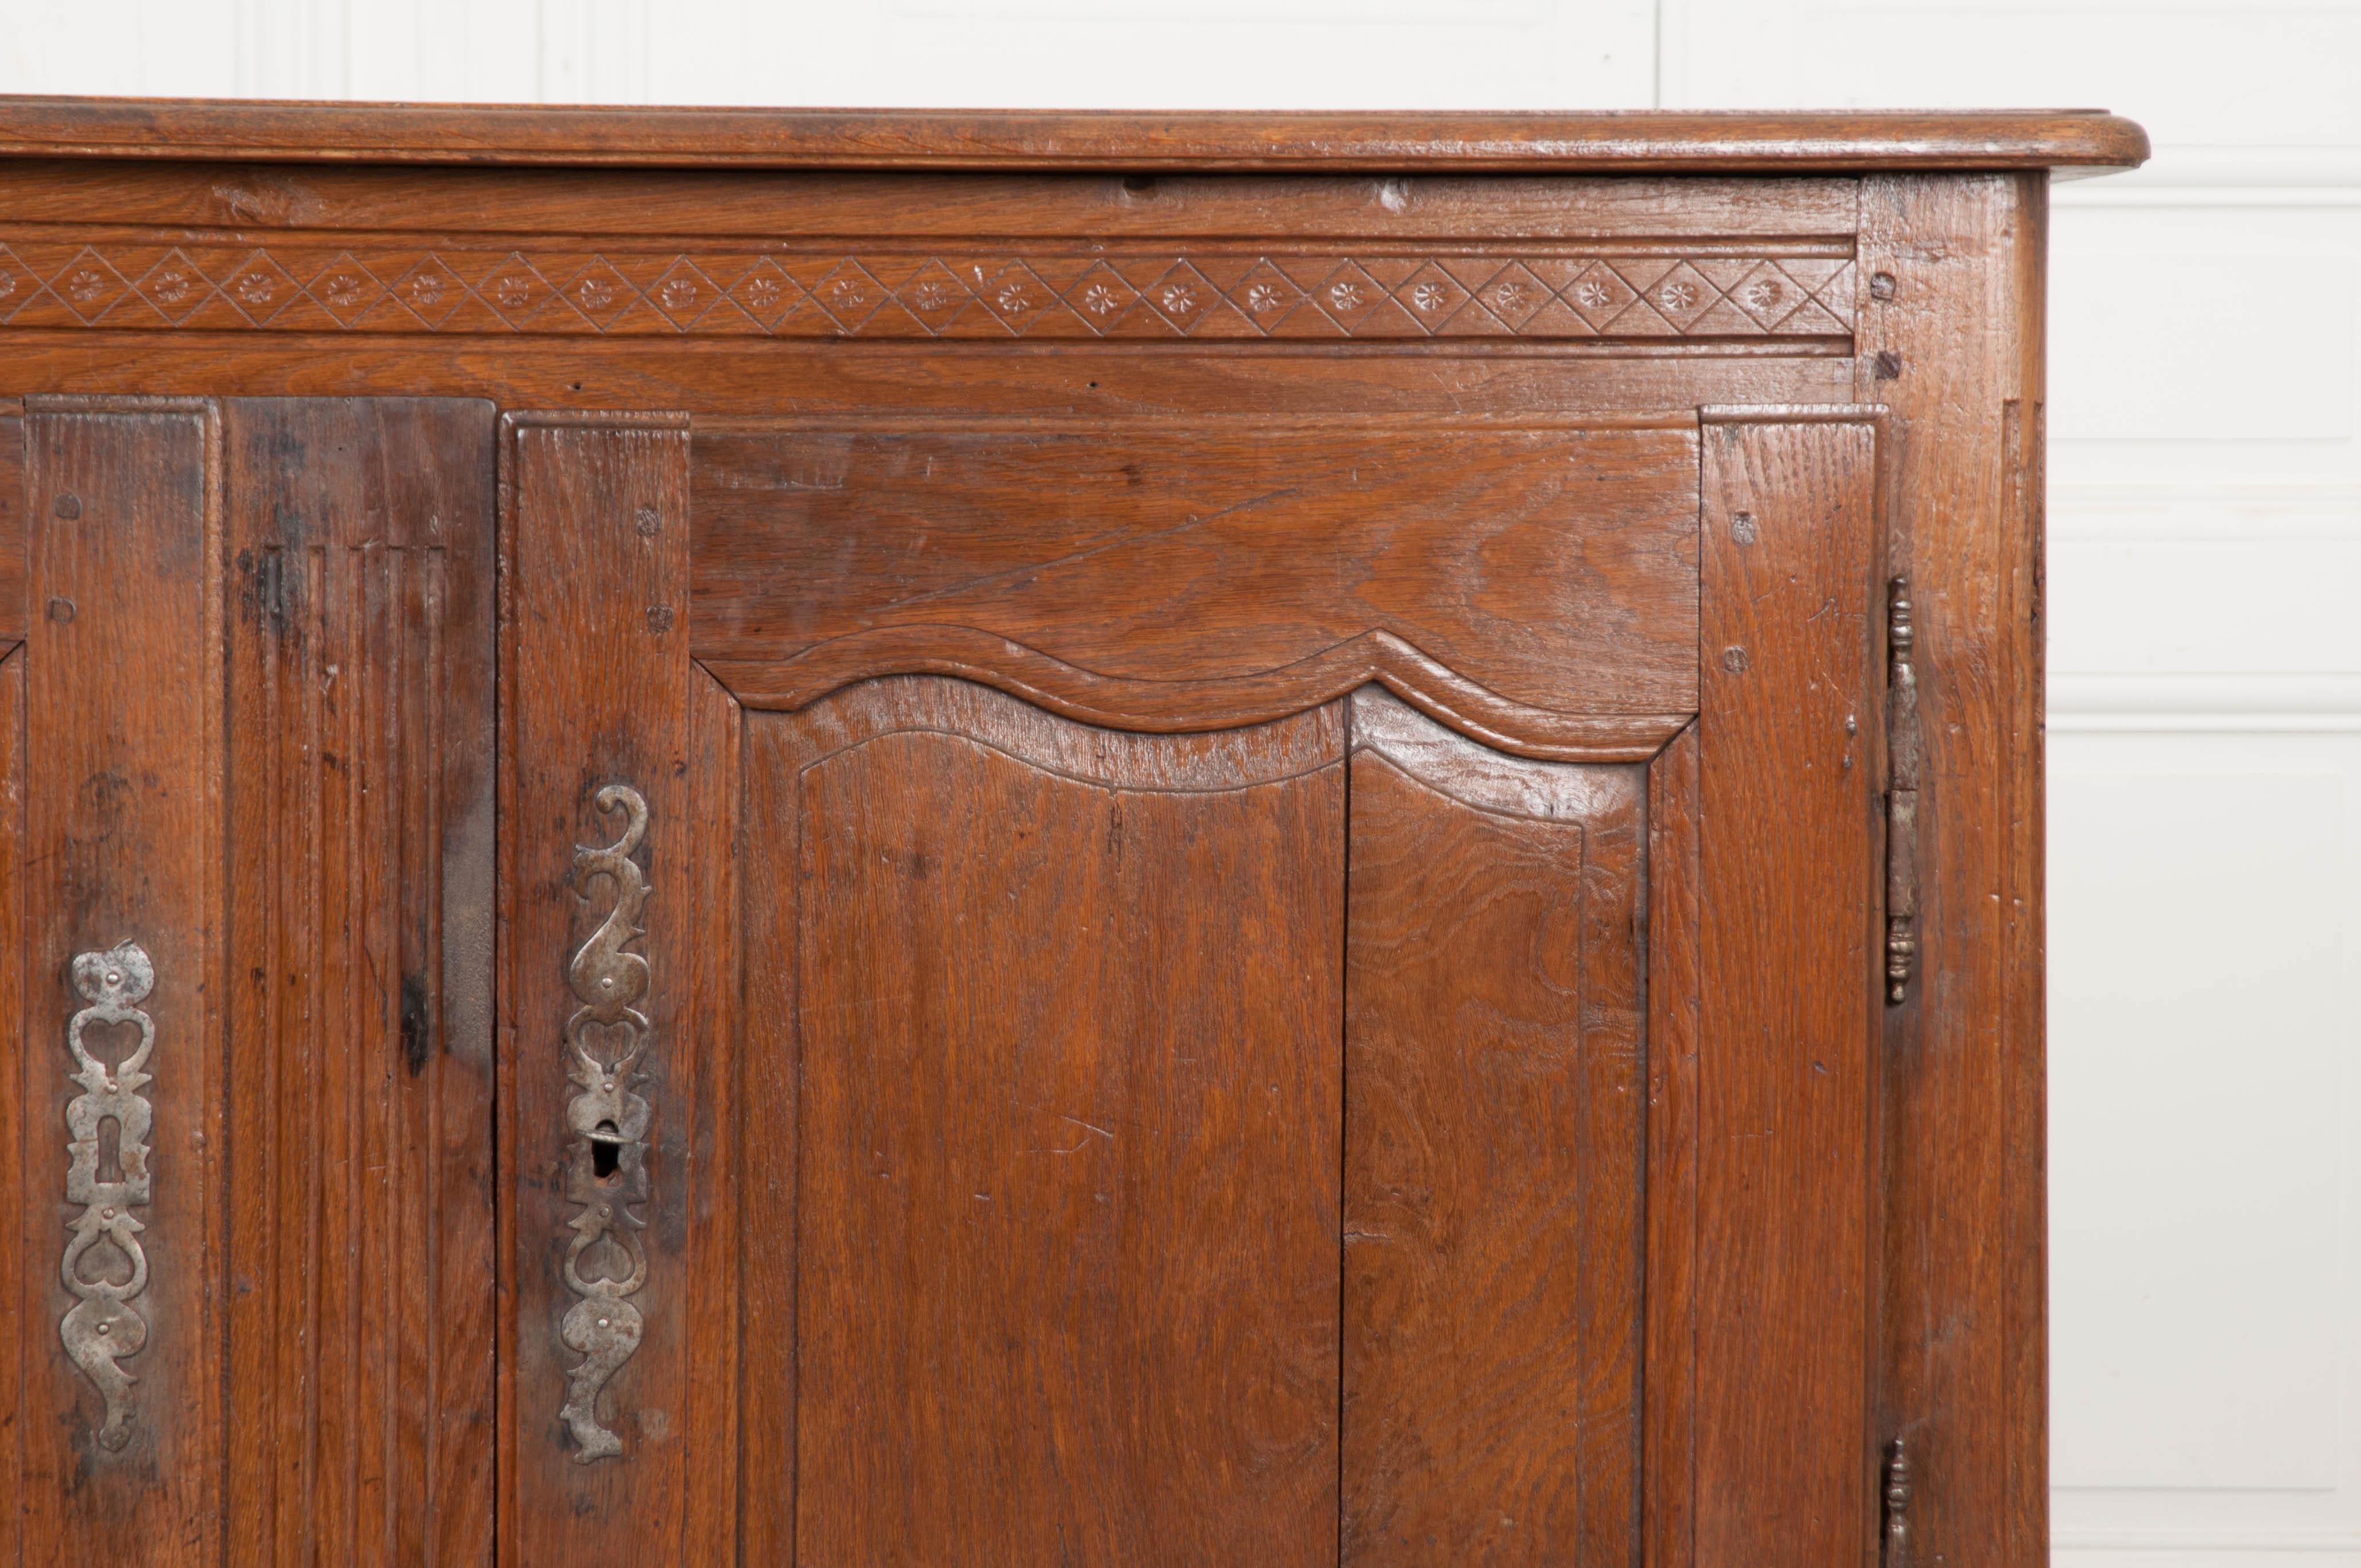 Dutch 19th century Provincial oak buffet a charming, hand carved oak buffet from the latter part of the 19th century. This remarkable Dutch antique features wonderfully carved details. A band of dots-in-diamond motif carving can be found at the